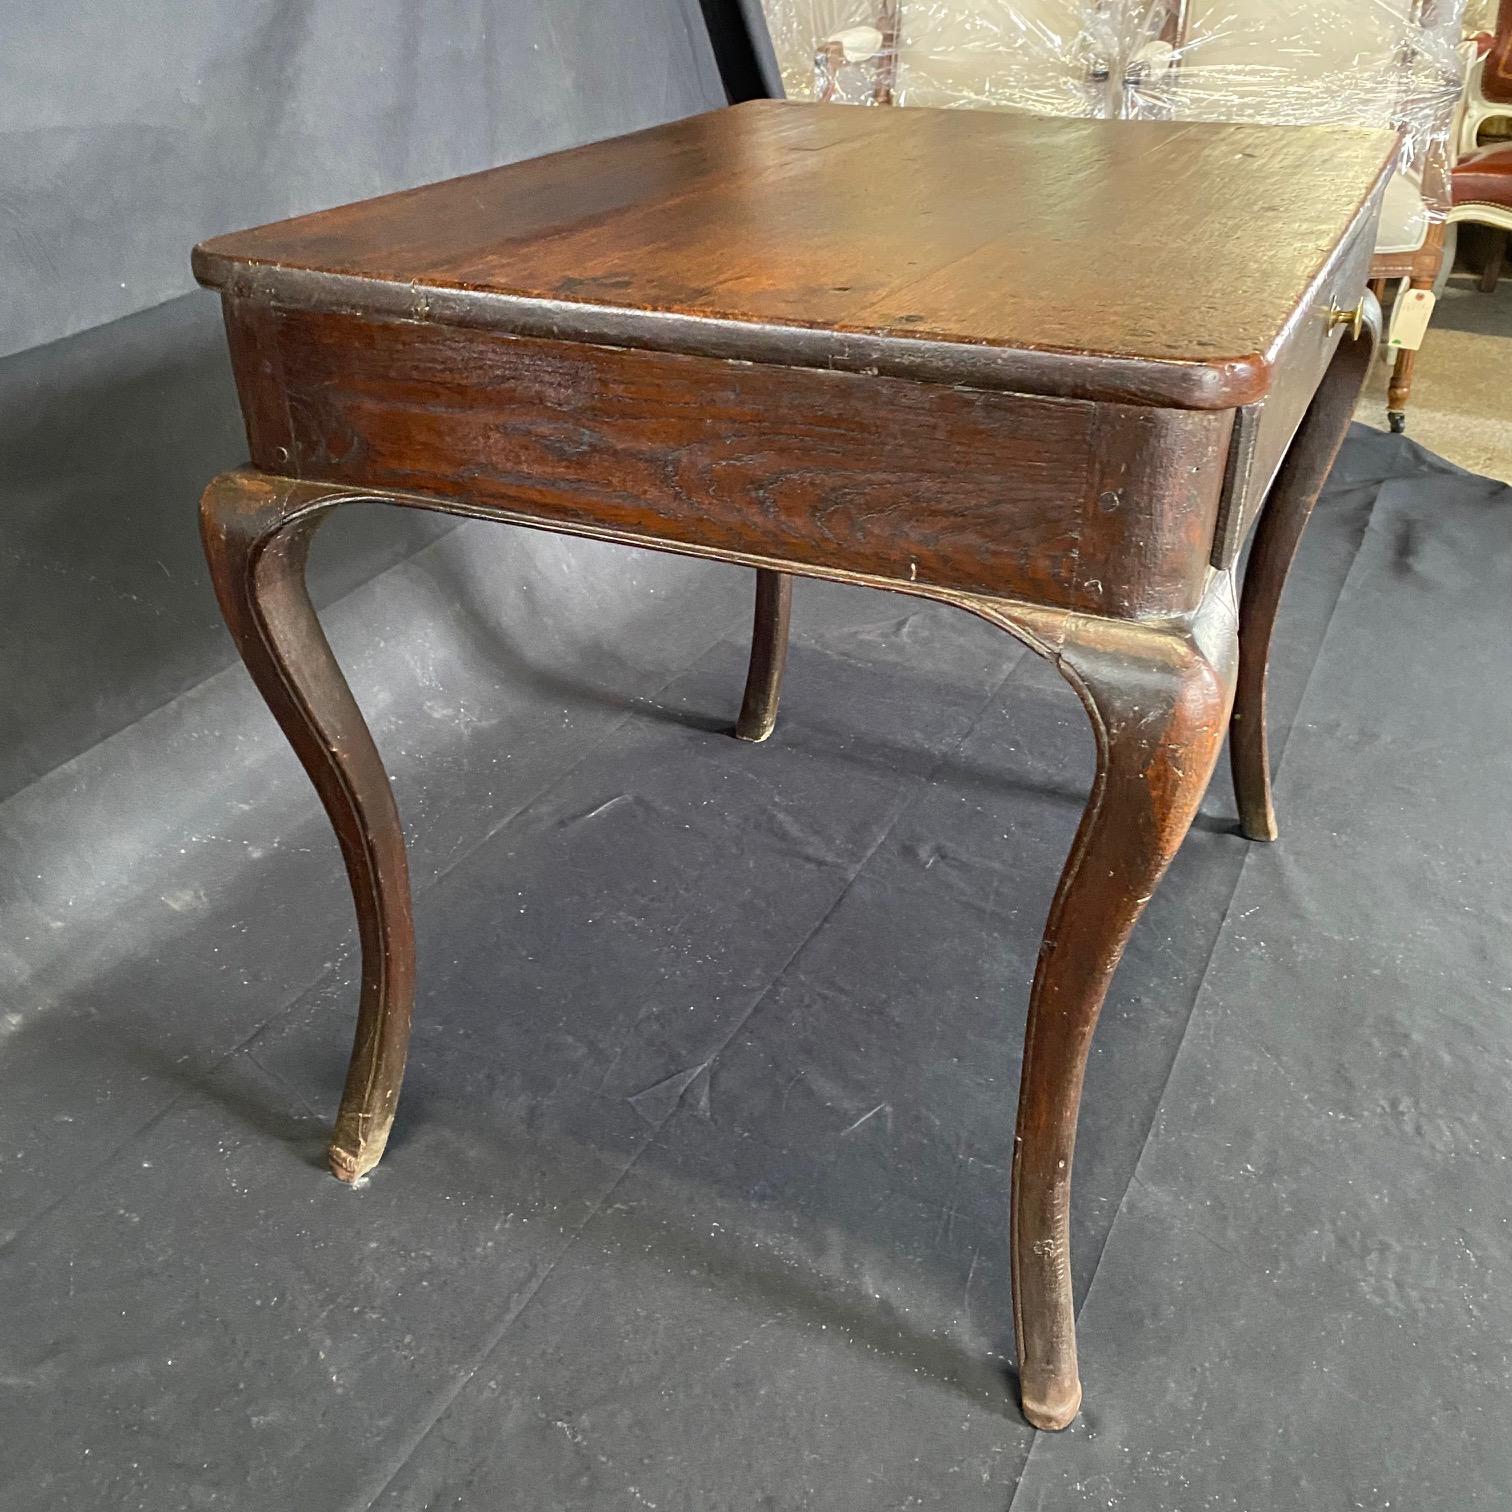 Elegant French Side Table or Desk with Hooved Feet In Good Condition For Sale In Hopewell, NJ